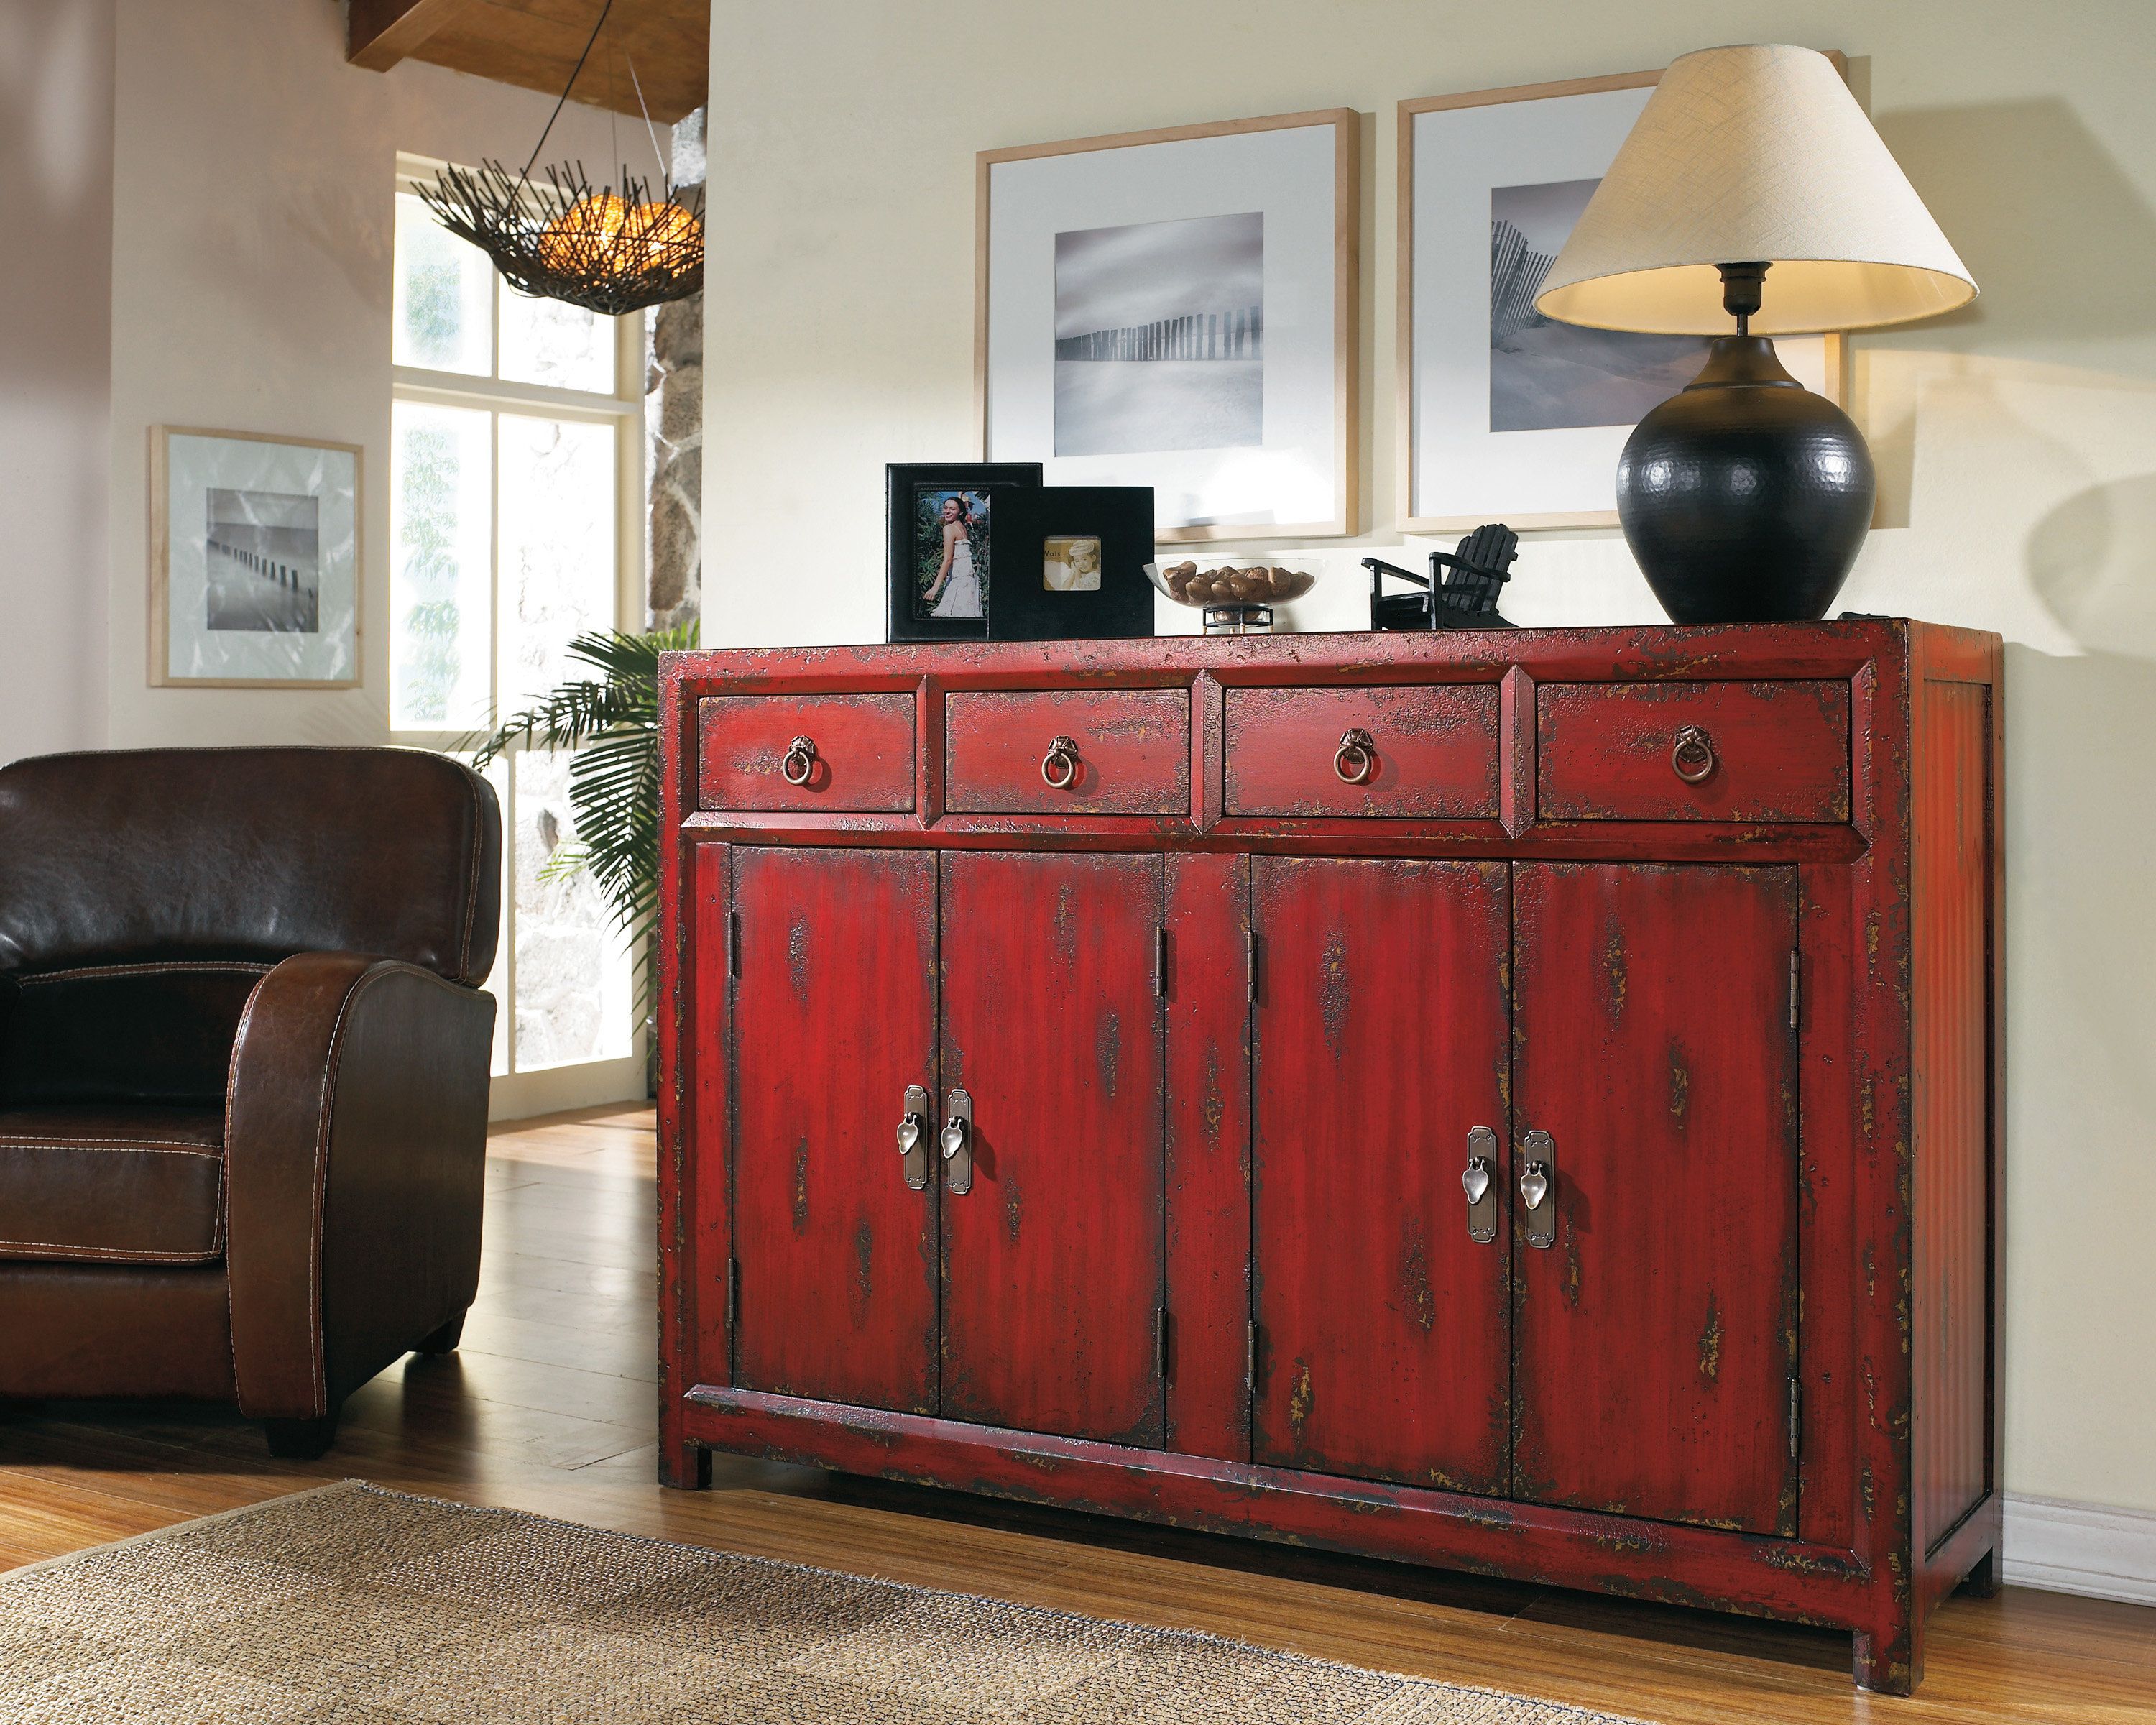 Farmhouse & Rustic Red Sideboards & Buffets | Birch Lane Intended For Velazco Sideboards (View 10 of 30)